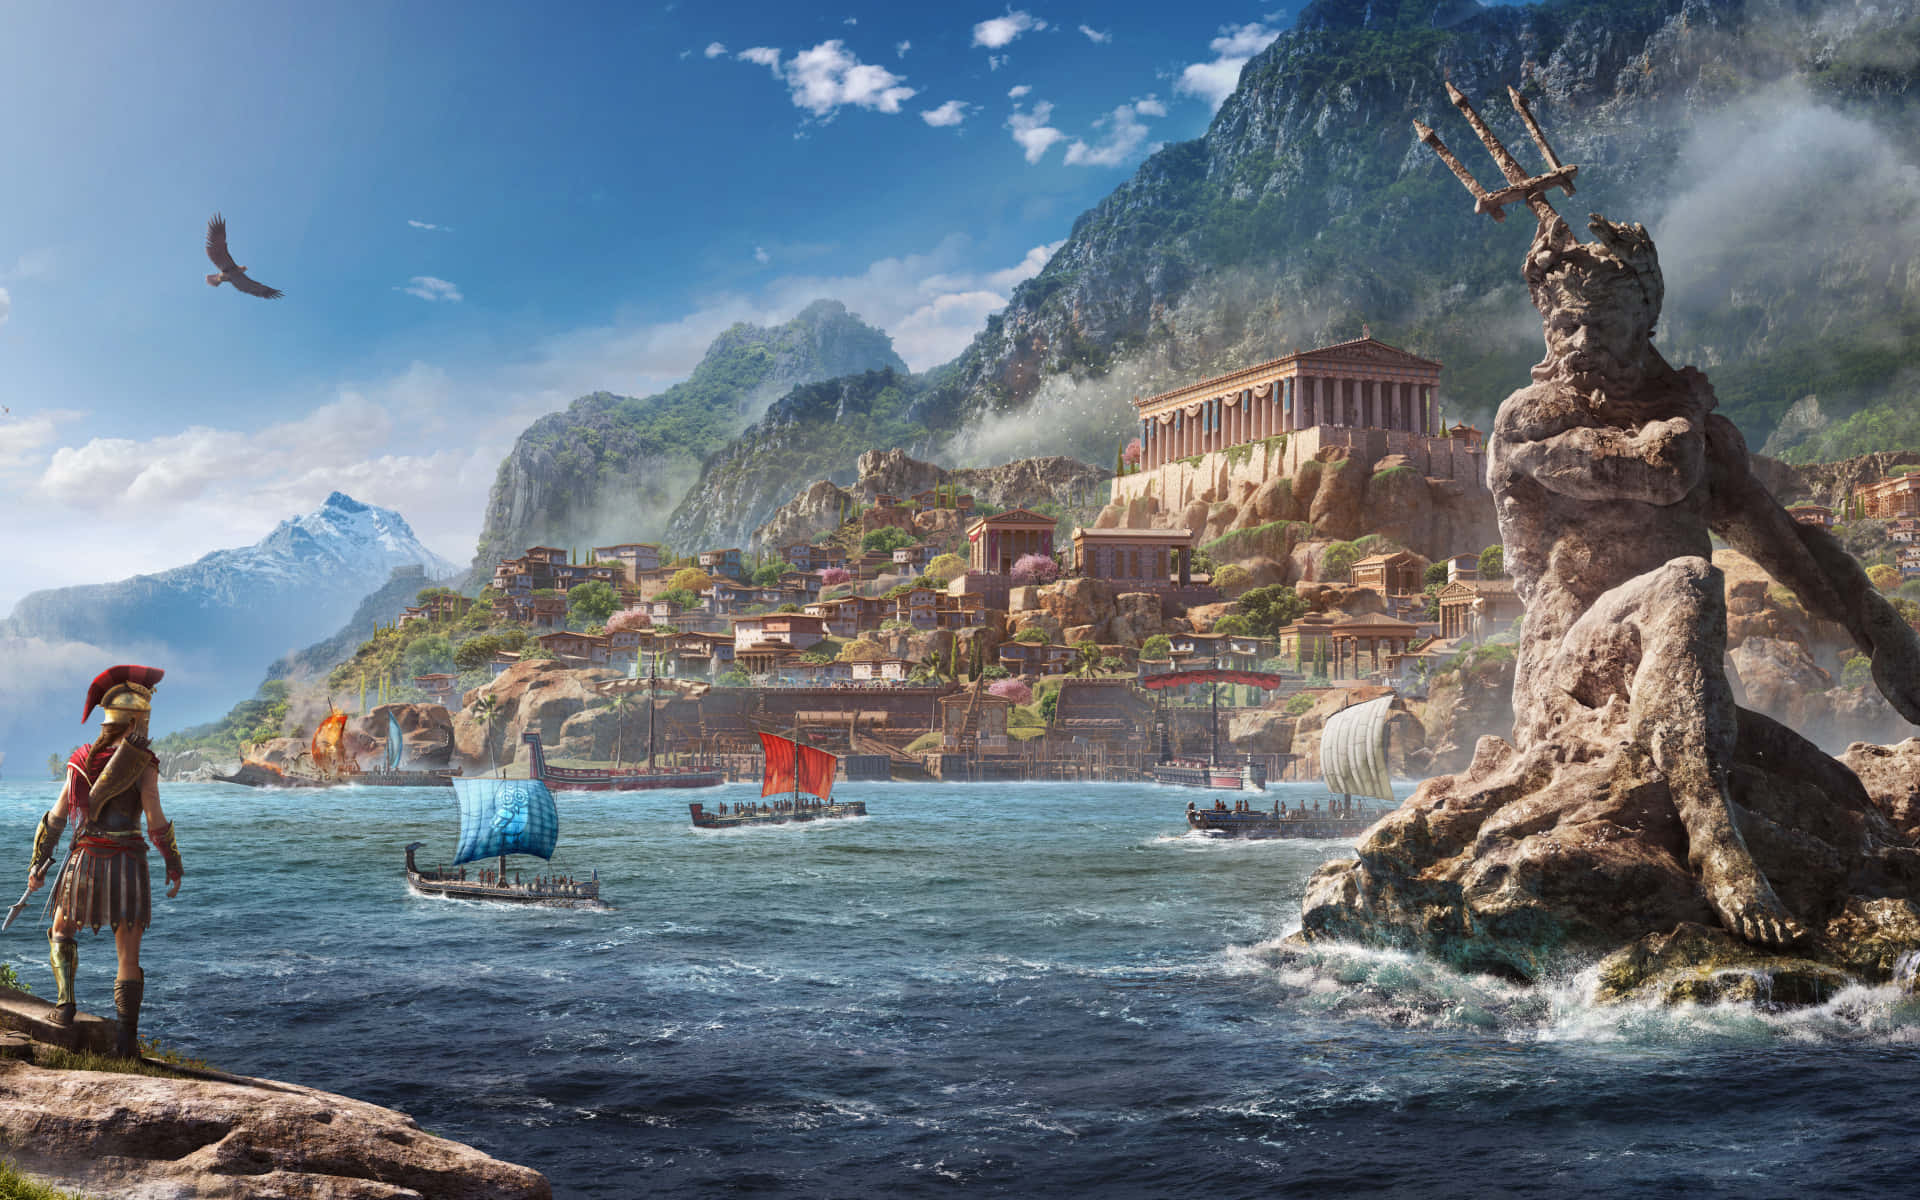 Alexios Best Assassin's Creed Odyssey Background